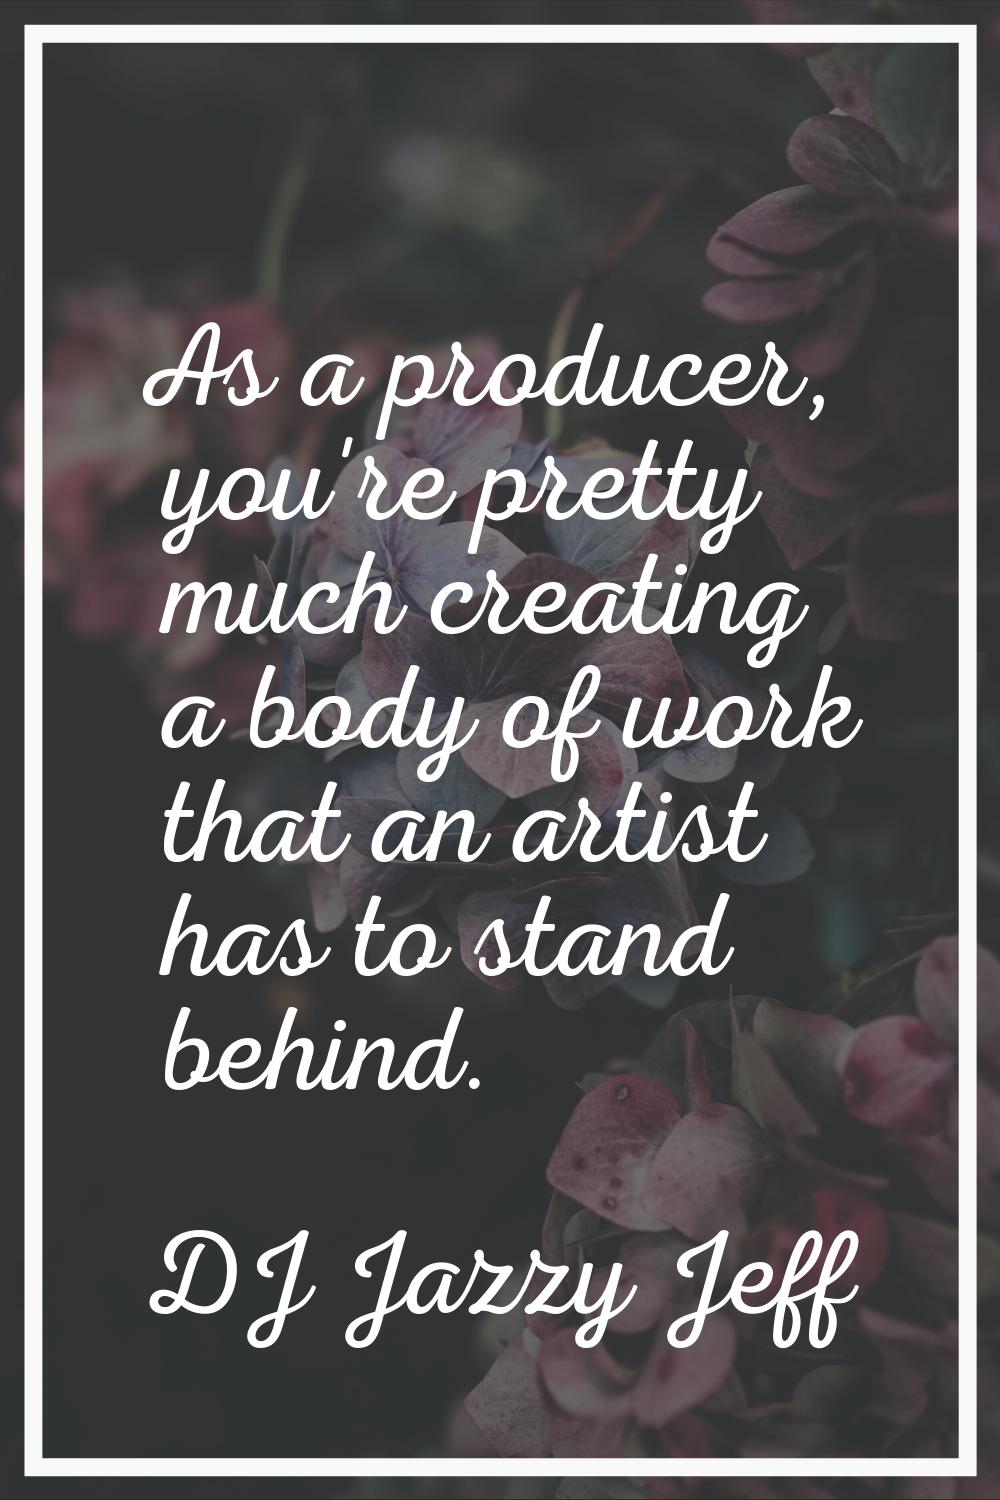 As a producer, you're pretty much creating a body of work that an artist has to stand behind.